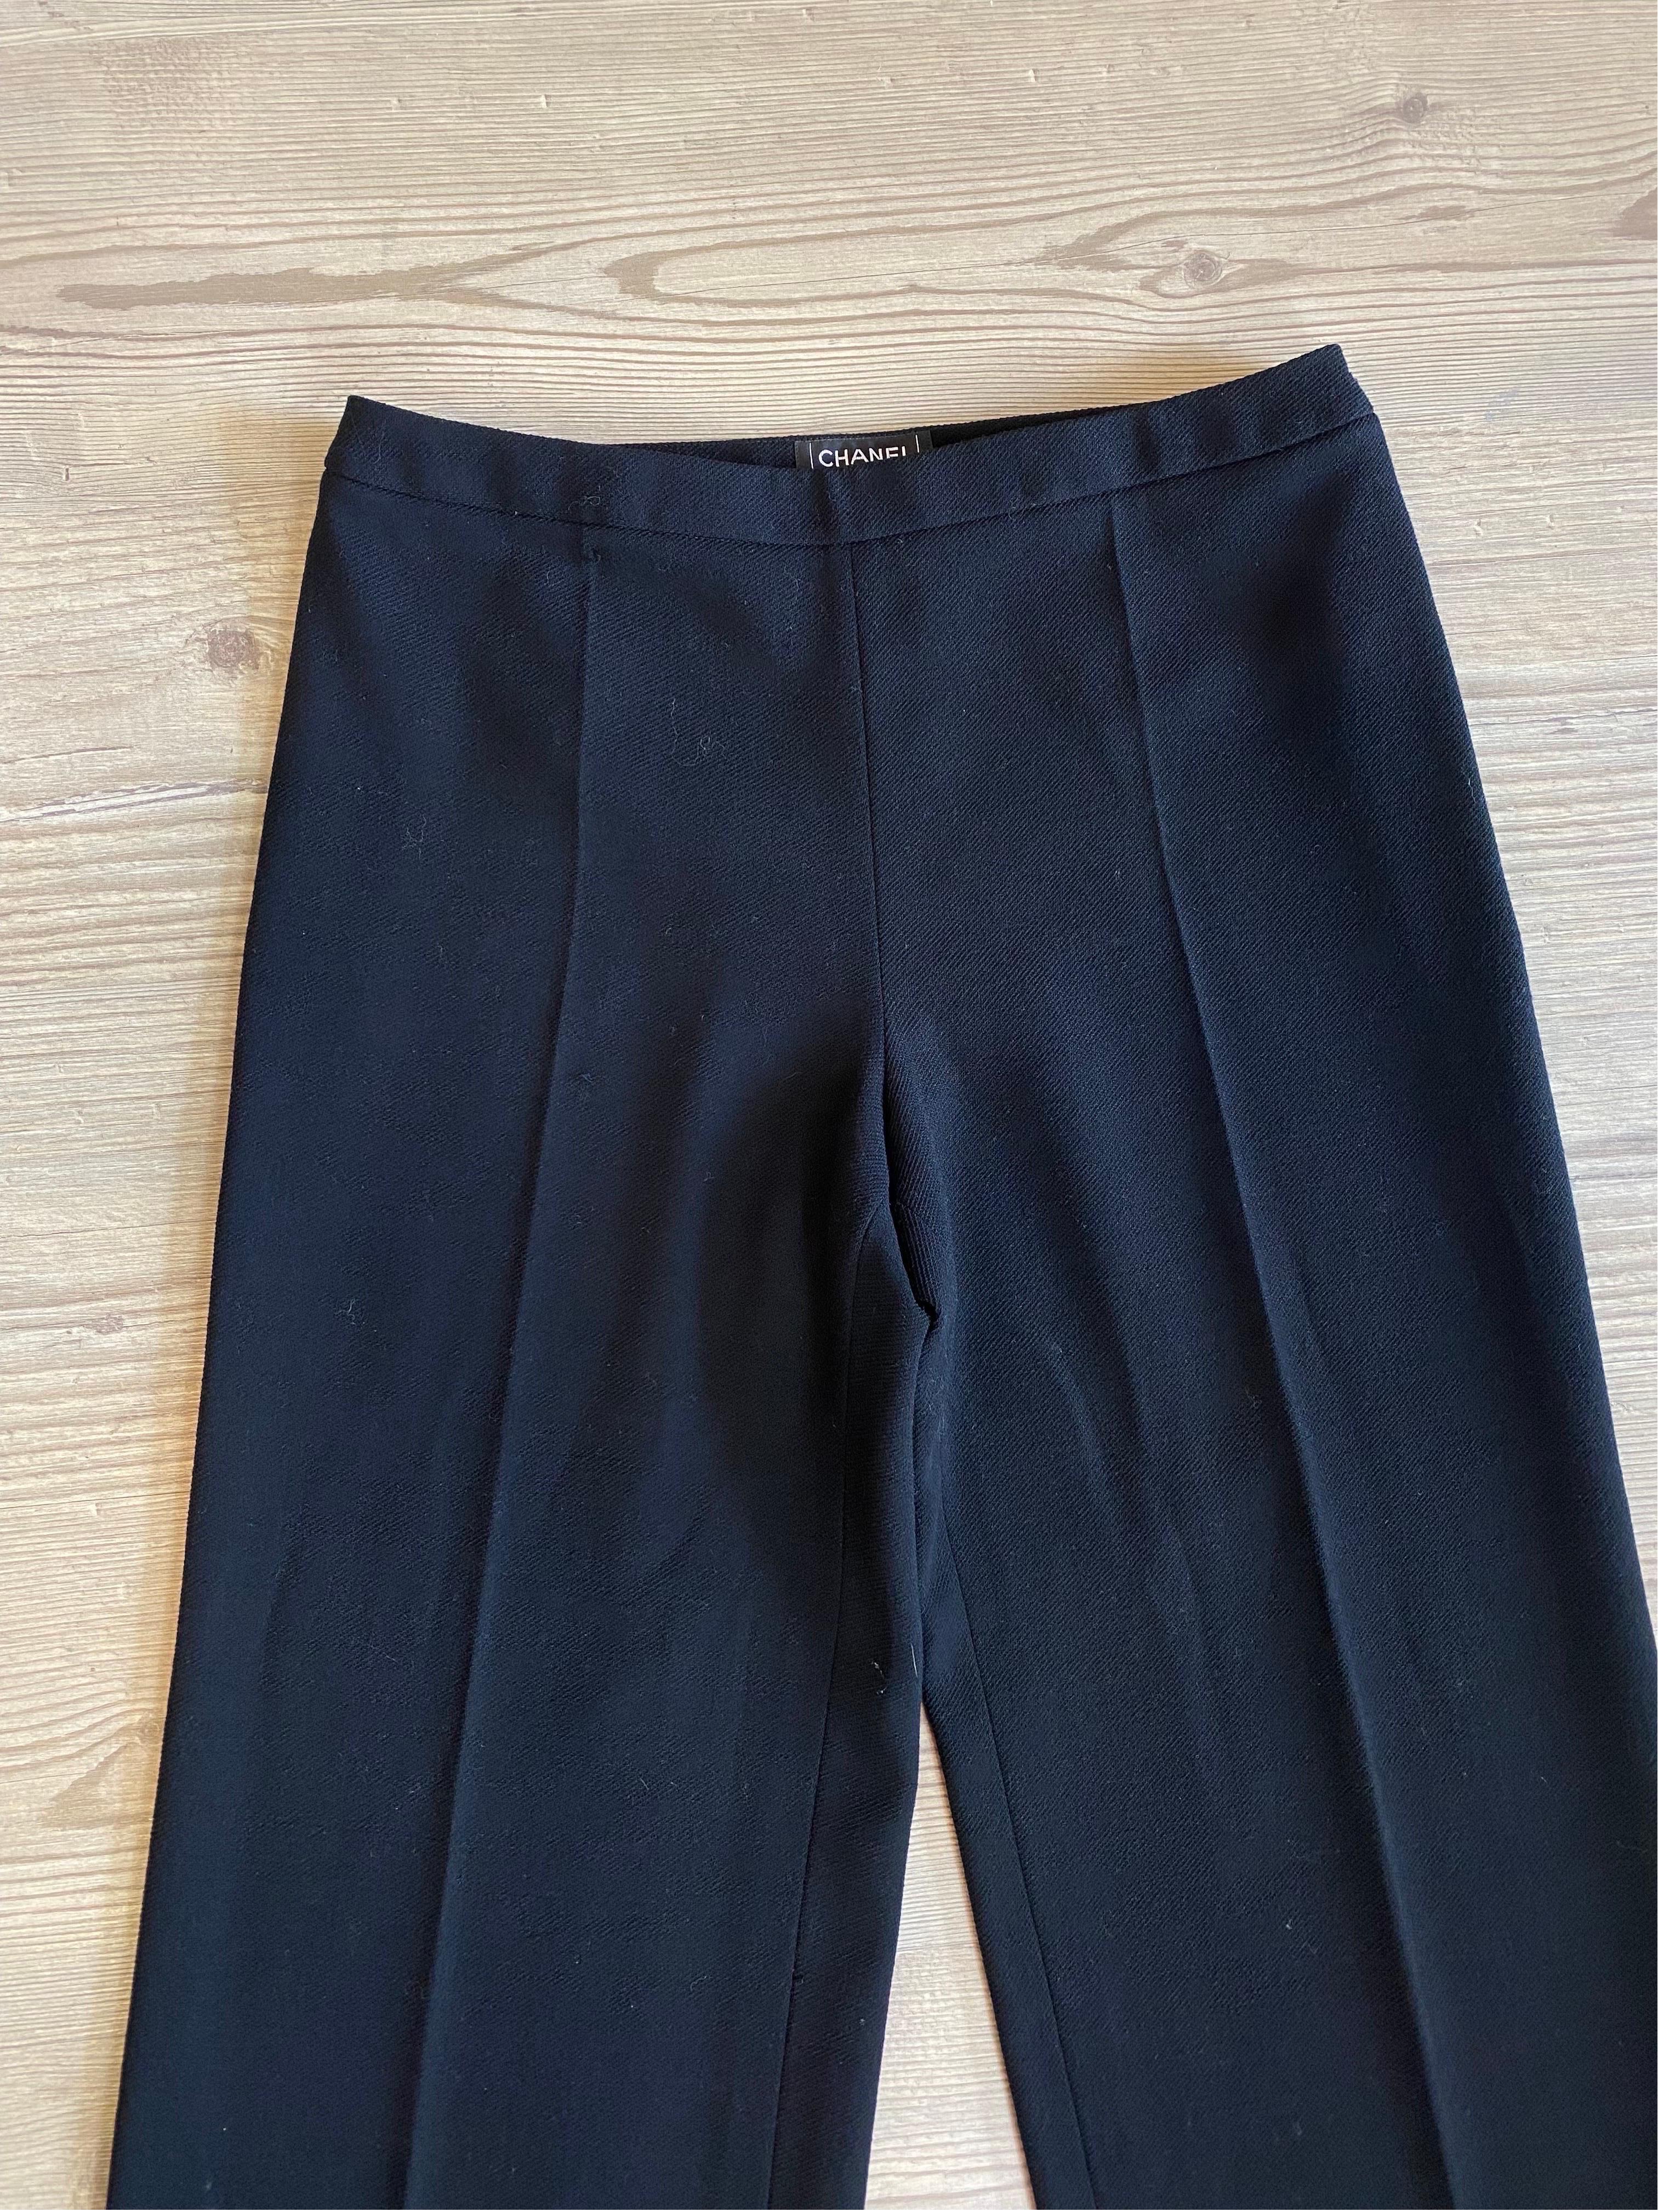 Chanel trousers.
In 100% wool, black colour.
French size 42 which corresponds to an Italian 46.
Waist 41cm
Length 108 cm
In good general condition, with signs of use and some pulled threads as shown in the photos.